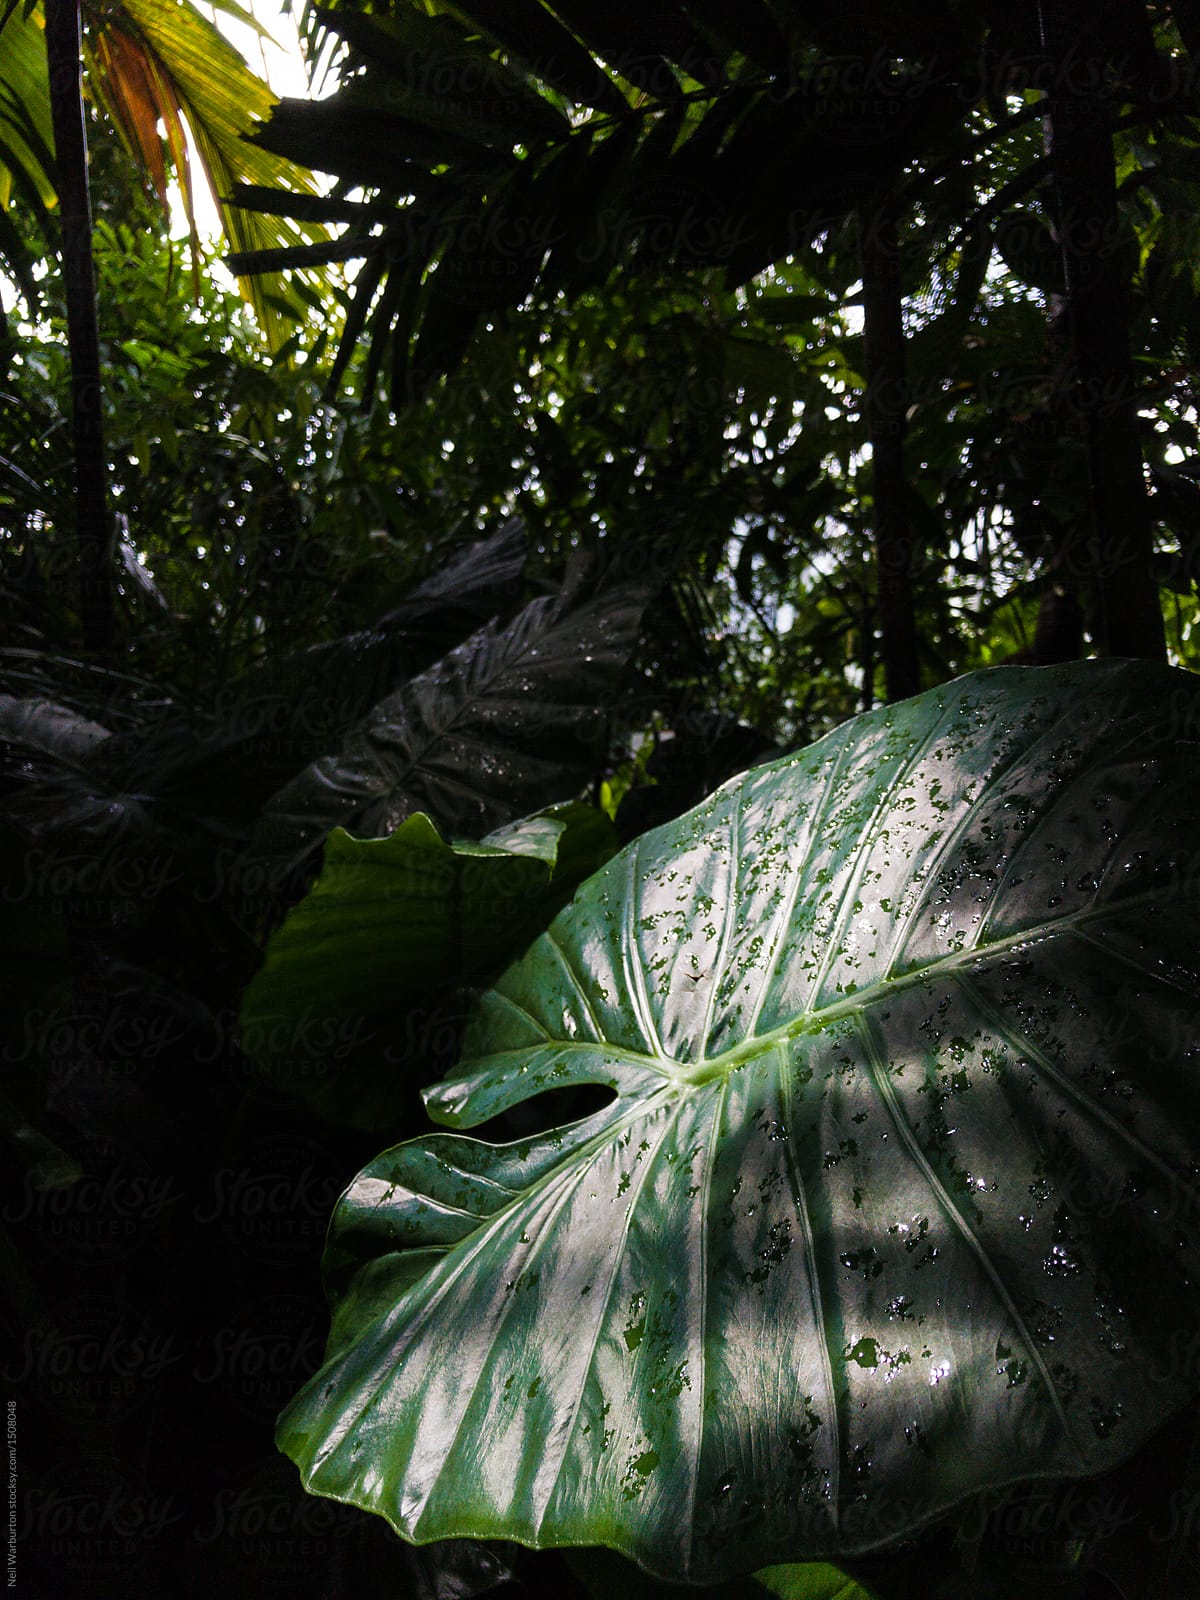 Shaded leaf in tropical environment